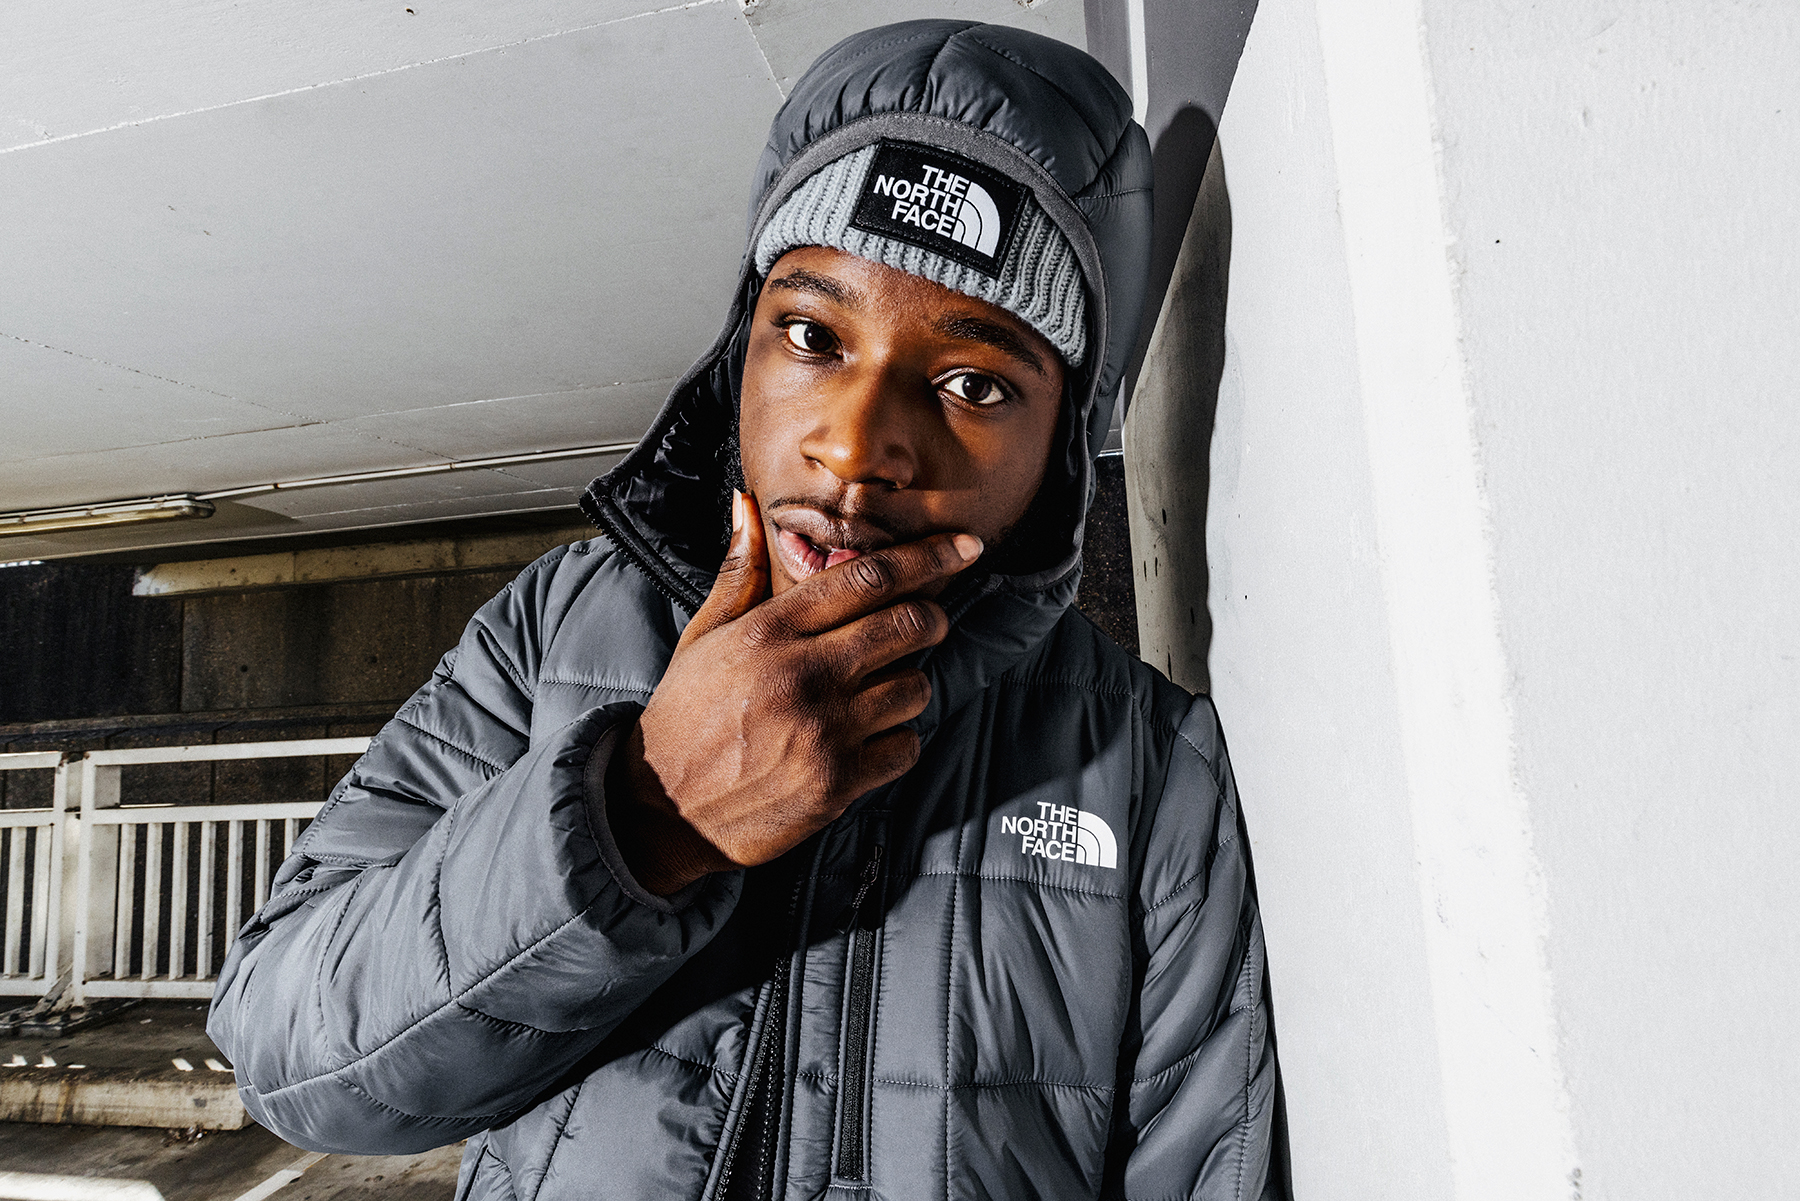 Australian rapper Jaecy in The North Face for JD Sports